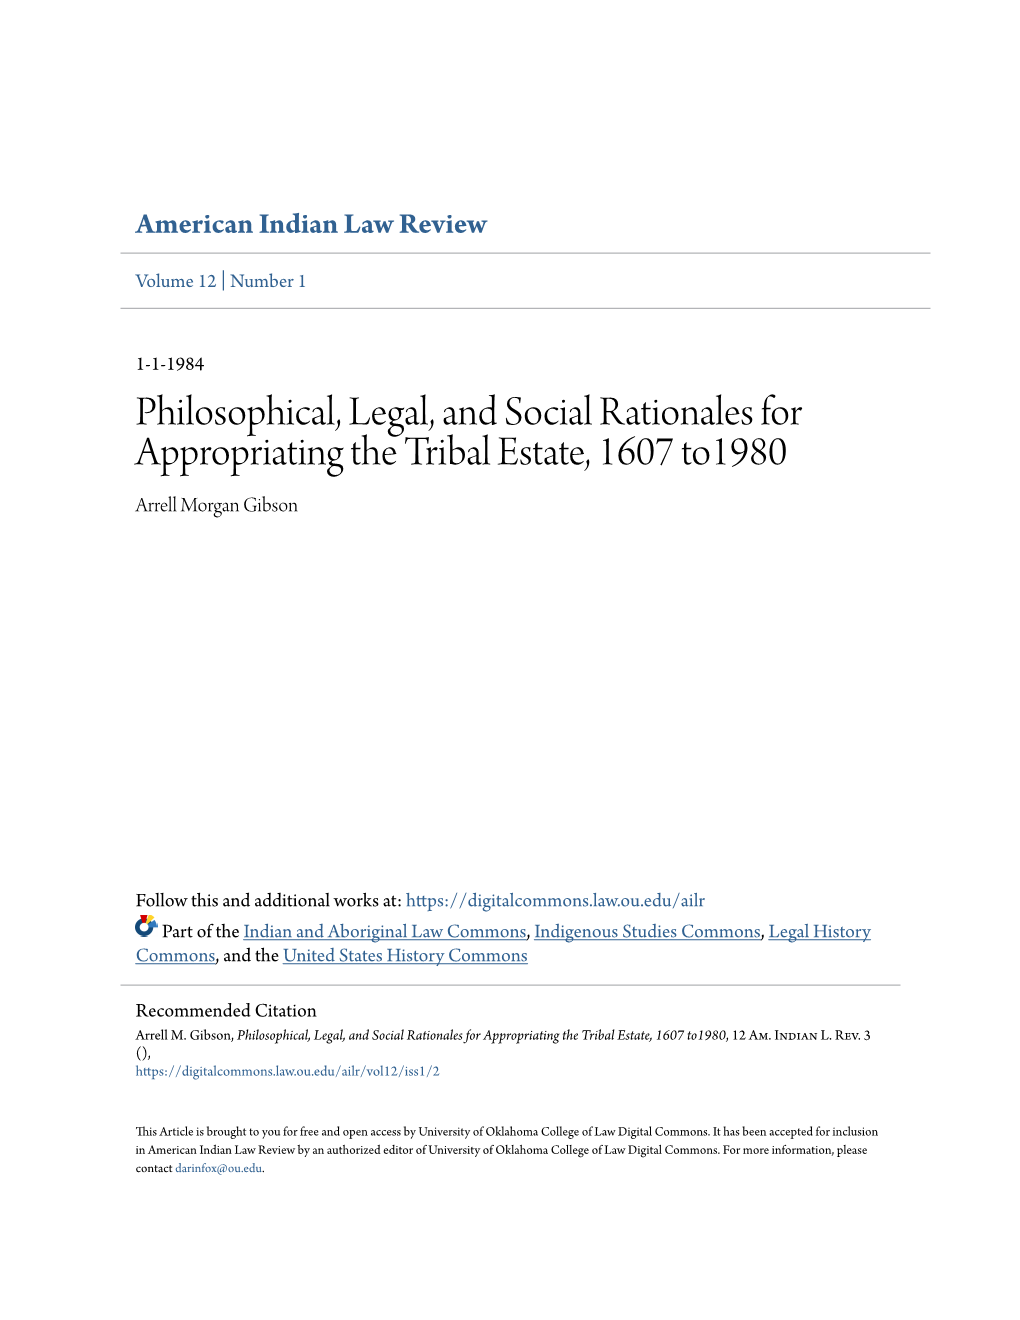 Philosophical, Legal, and Social Rationales for Appropriating the Tribal Estate, 1607 To1980 Arrell Morgan Gibson